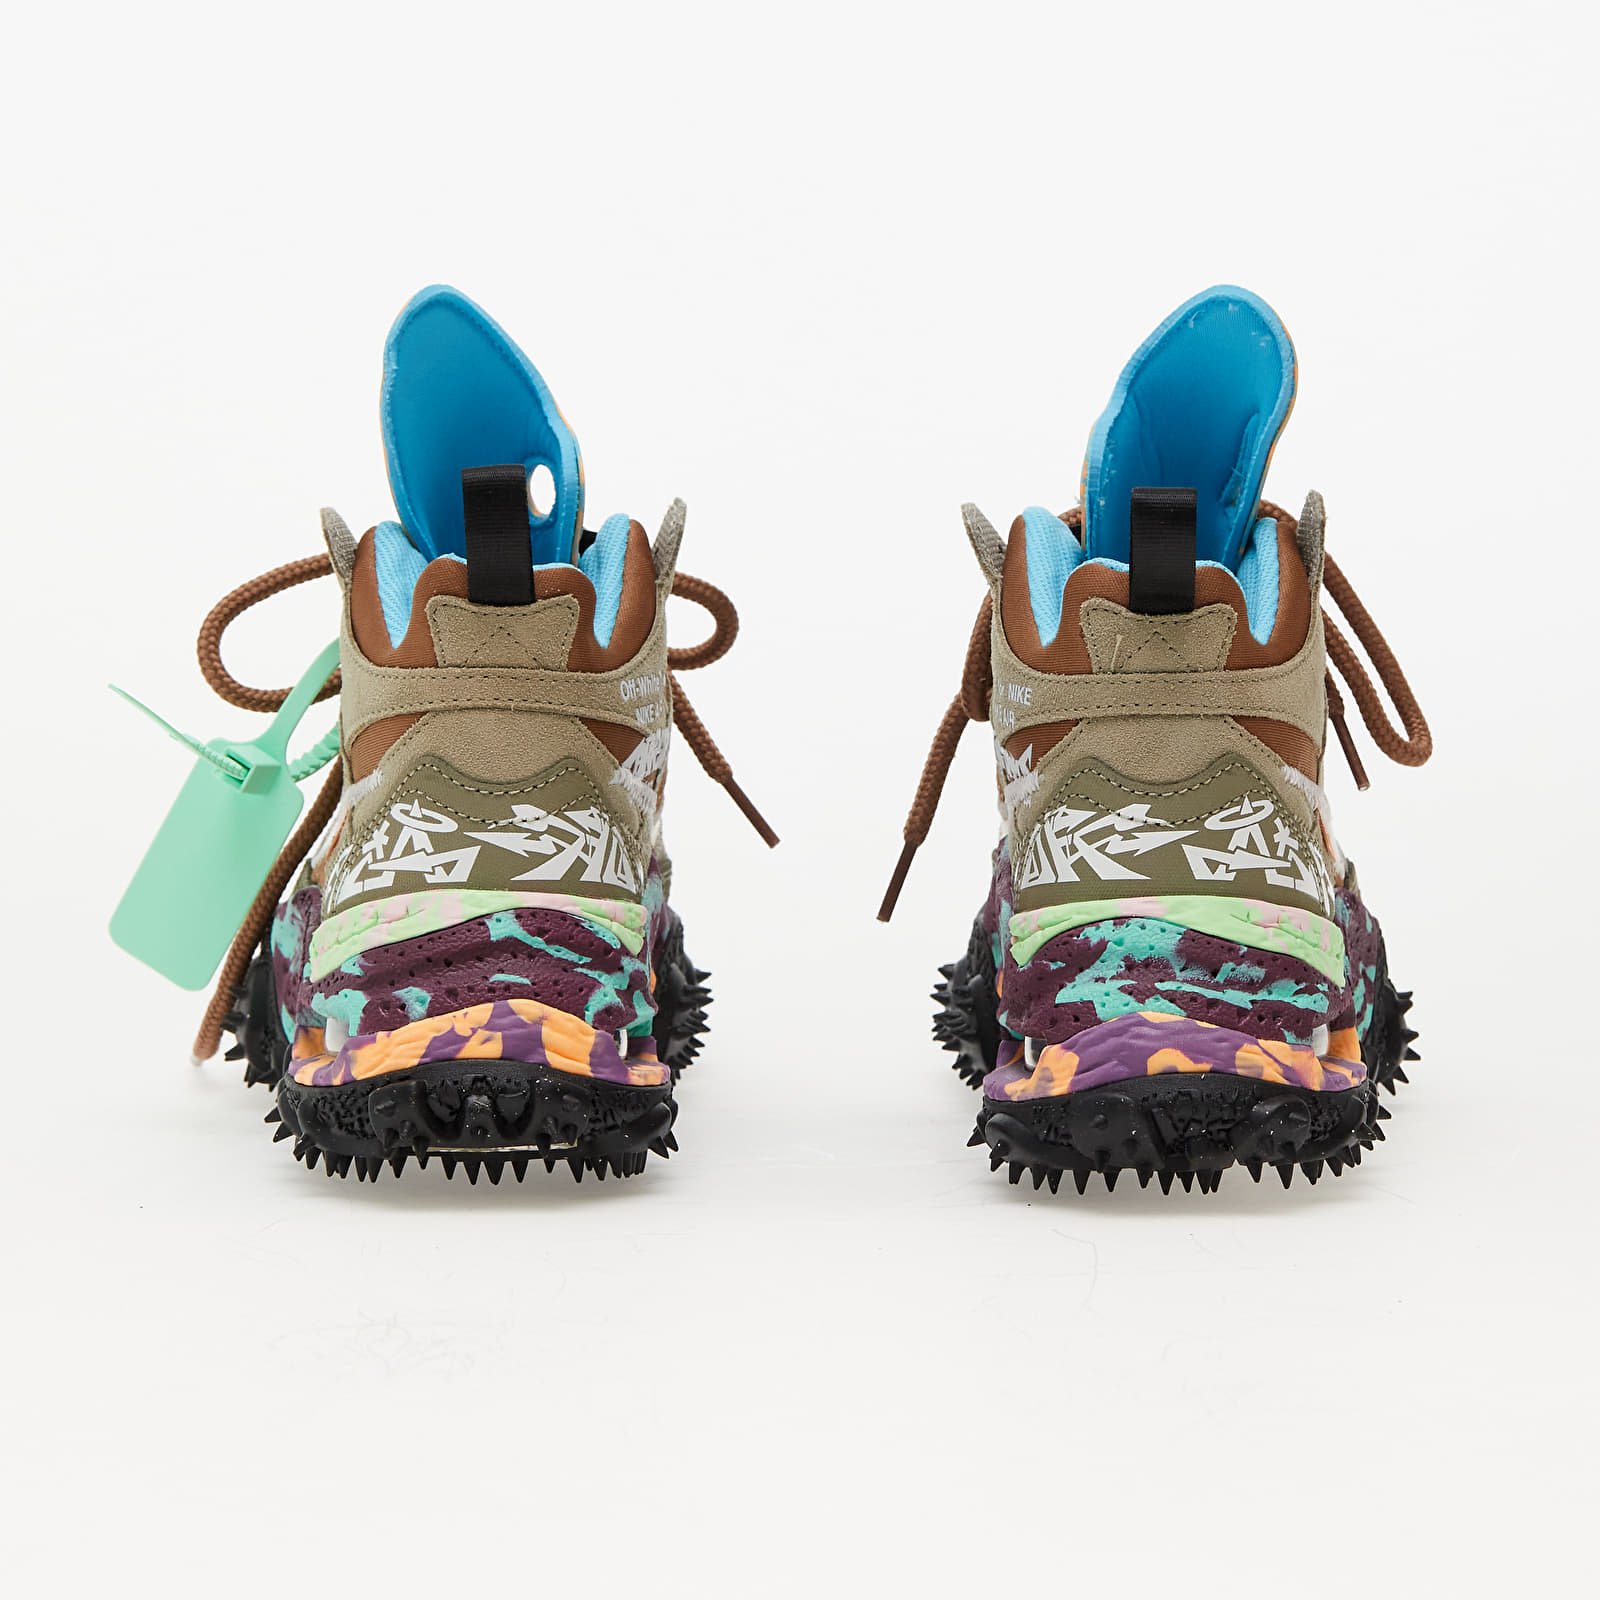 Off-White x Air Terra Forma "Archaeo Brown"